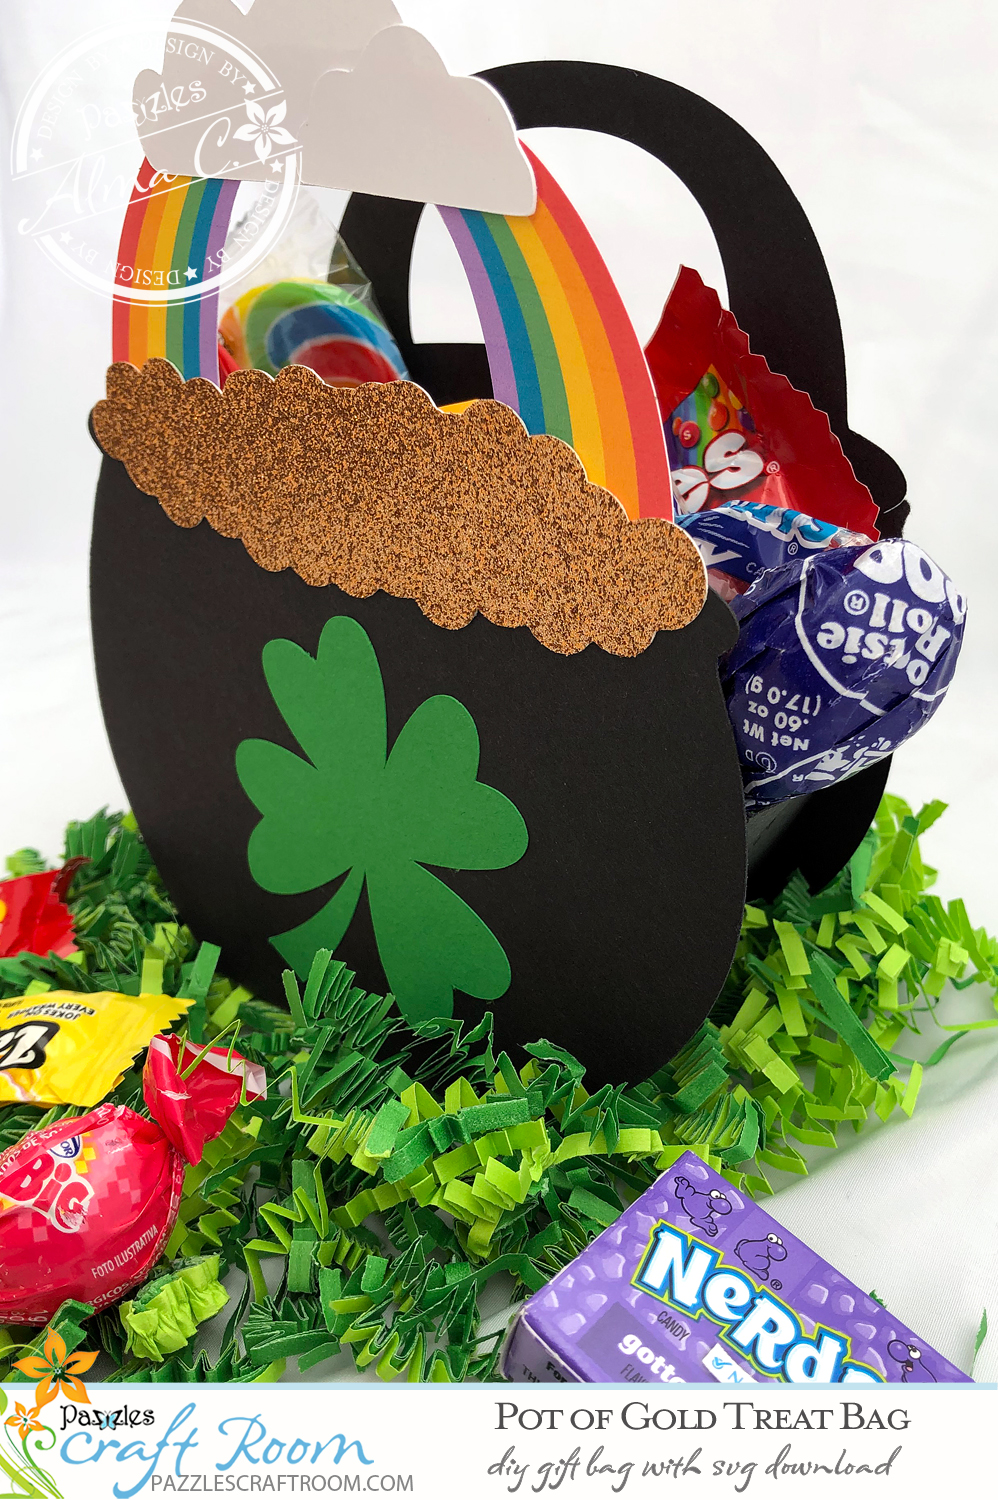 Pazzles DIY Pot of Gold St. Patrick's Day Treat Bag with instant SVG download. Compatible with all electronic cutters including Pazzles Inspiration, Cricut, and Silhouette Cameo. Design by Alma Cervantes.